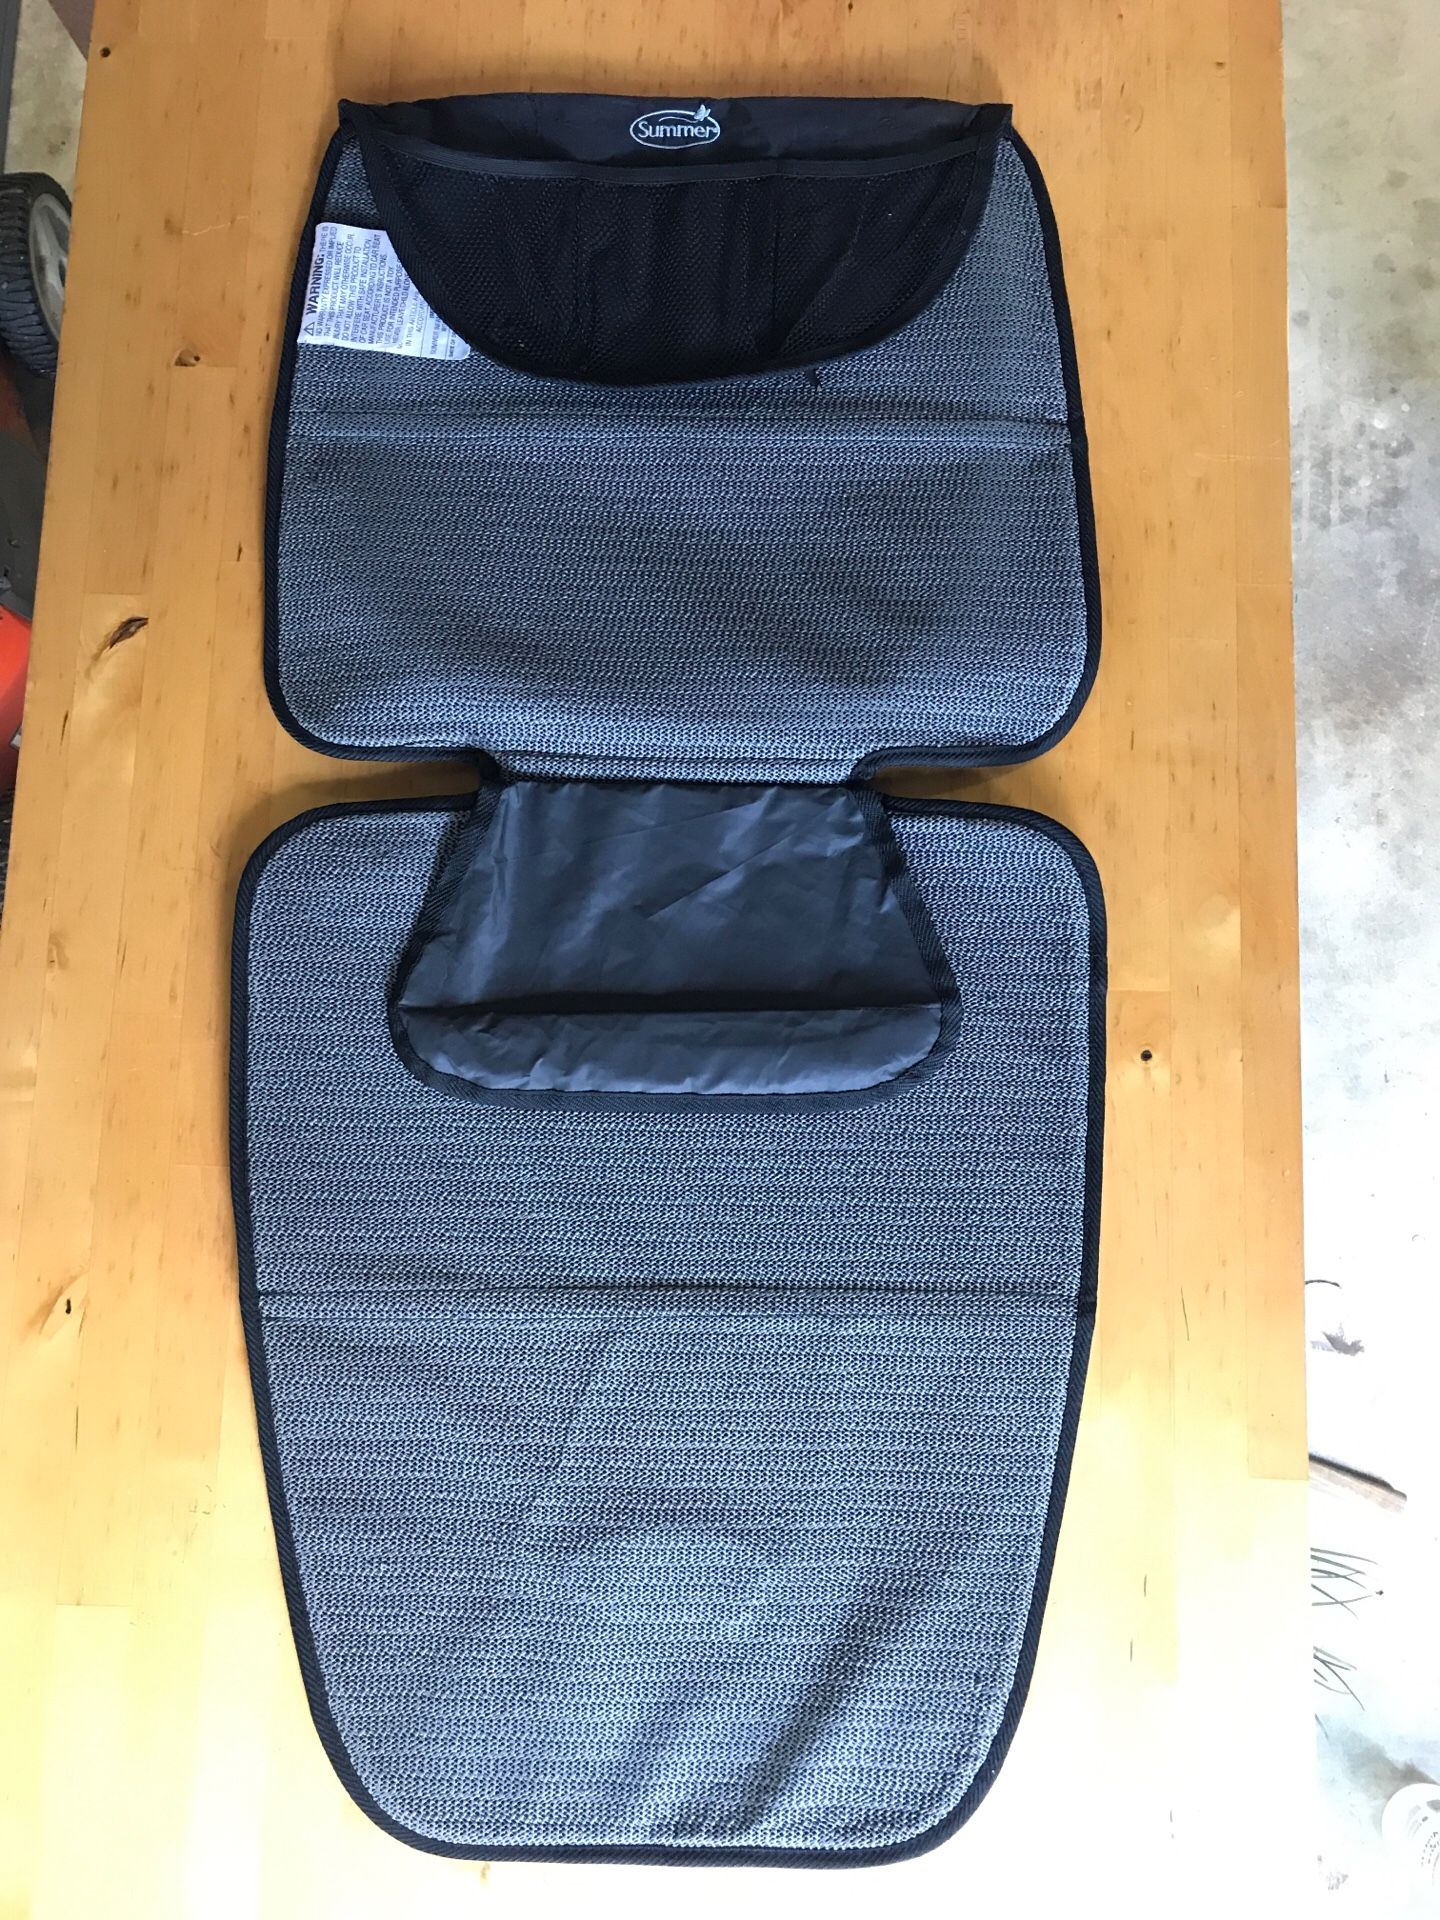 Two Summer brand seat protectors for under car seats